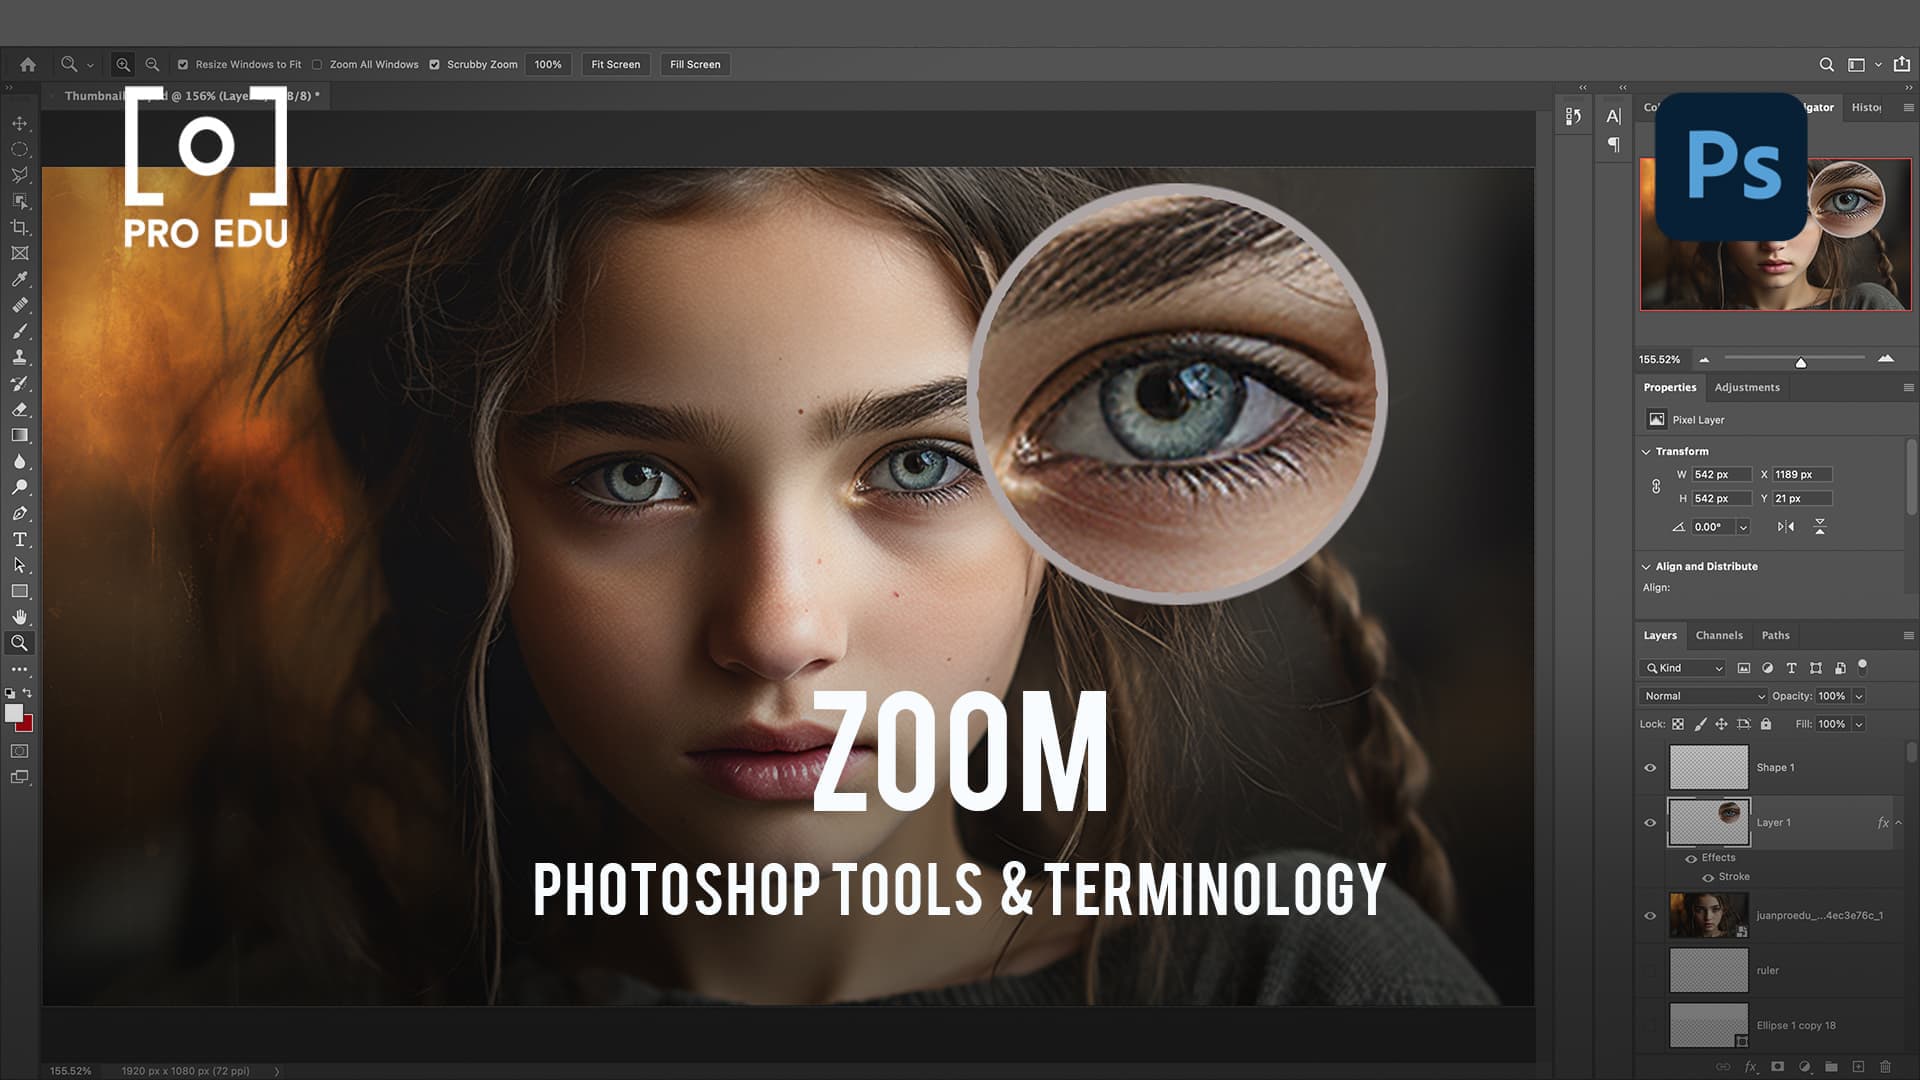 Zoom Tool Functions in Photoshop - PRO EDU Guide